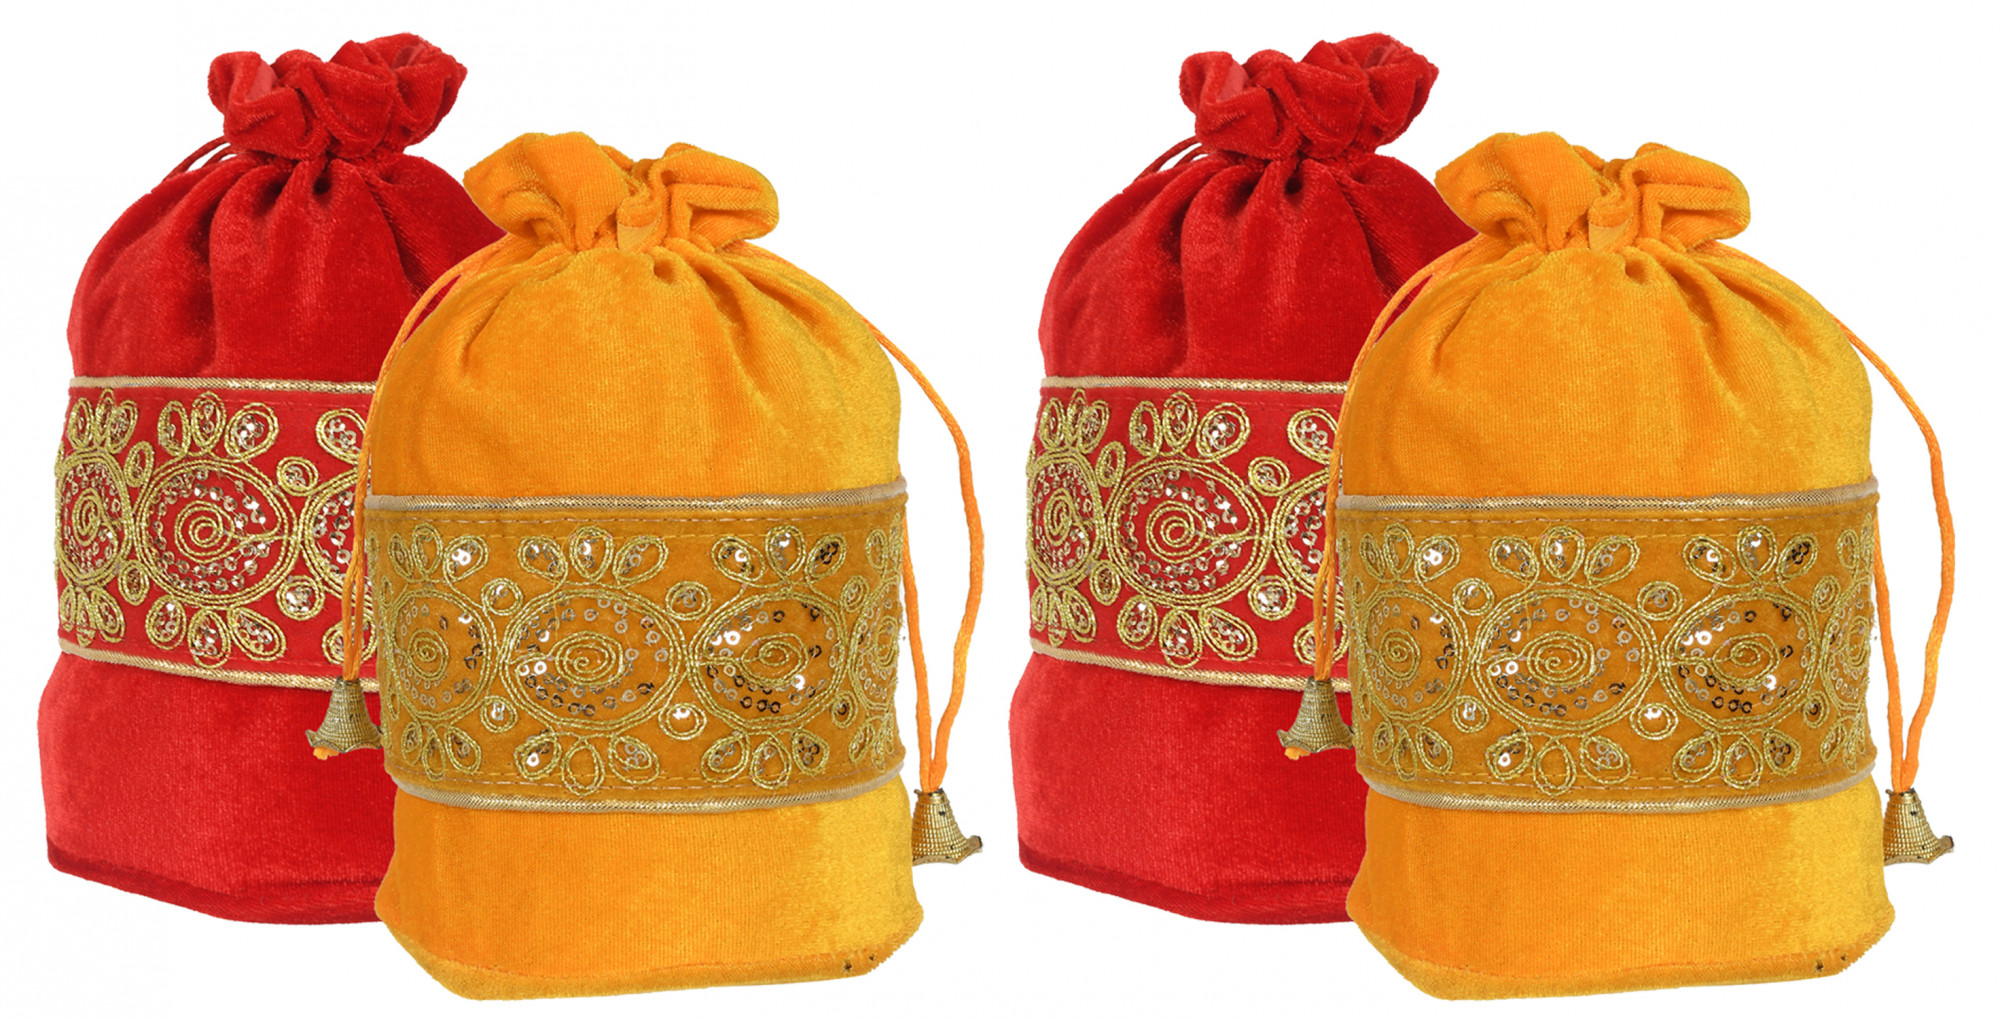 Kuber Industries Embroidered Design Drawstring Potli Bag Party Wedding Favor Gift Jewelry Bags-(Red & Yellow)